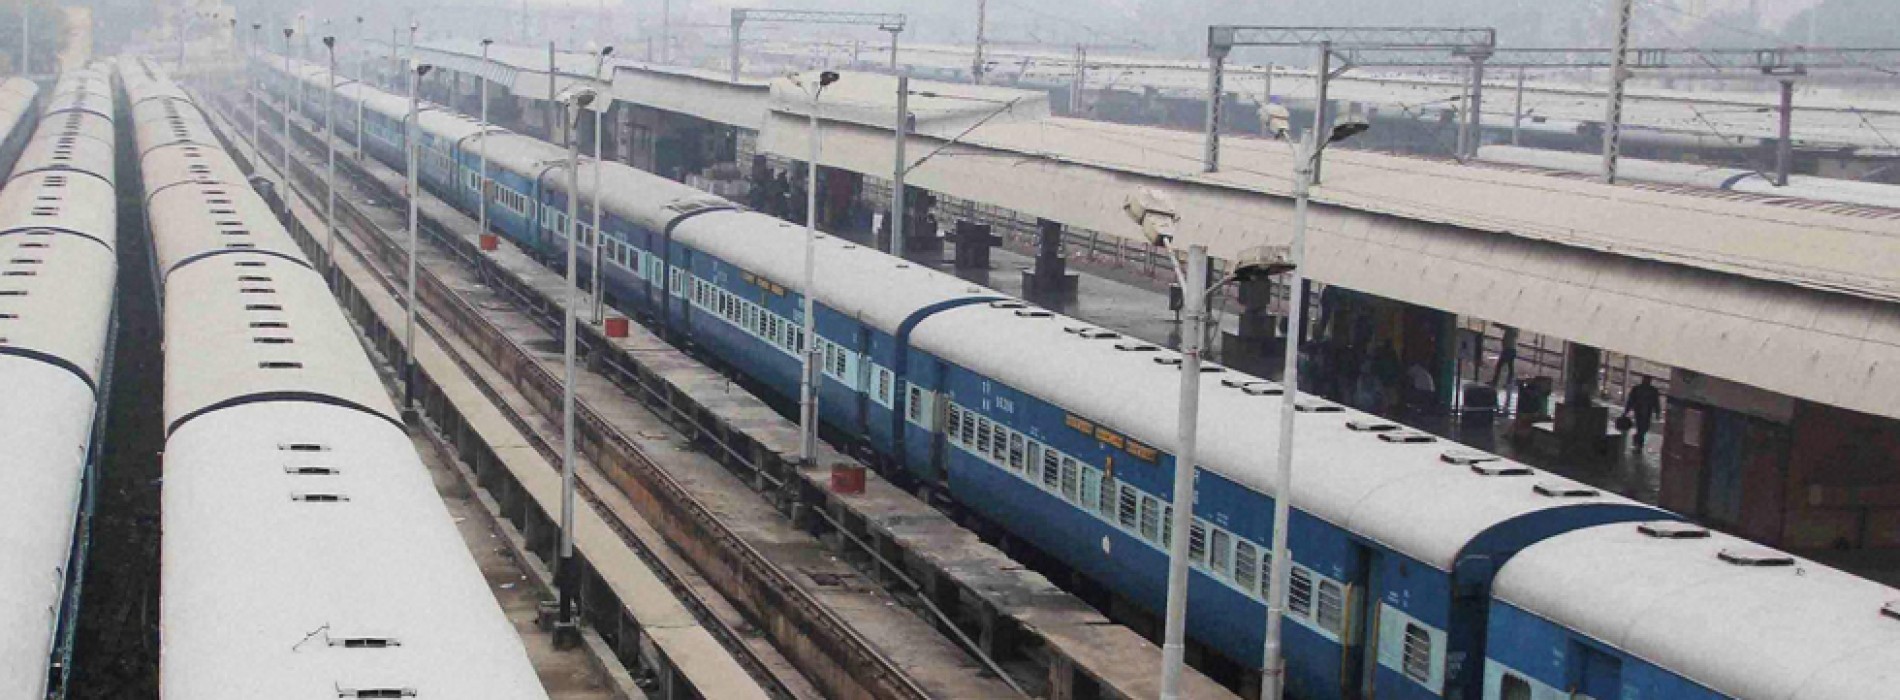 No service charge on train e-ticket till June 30